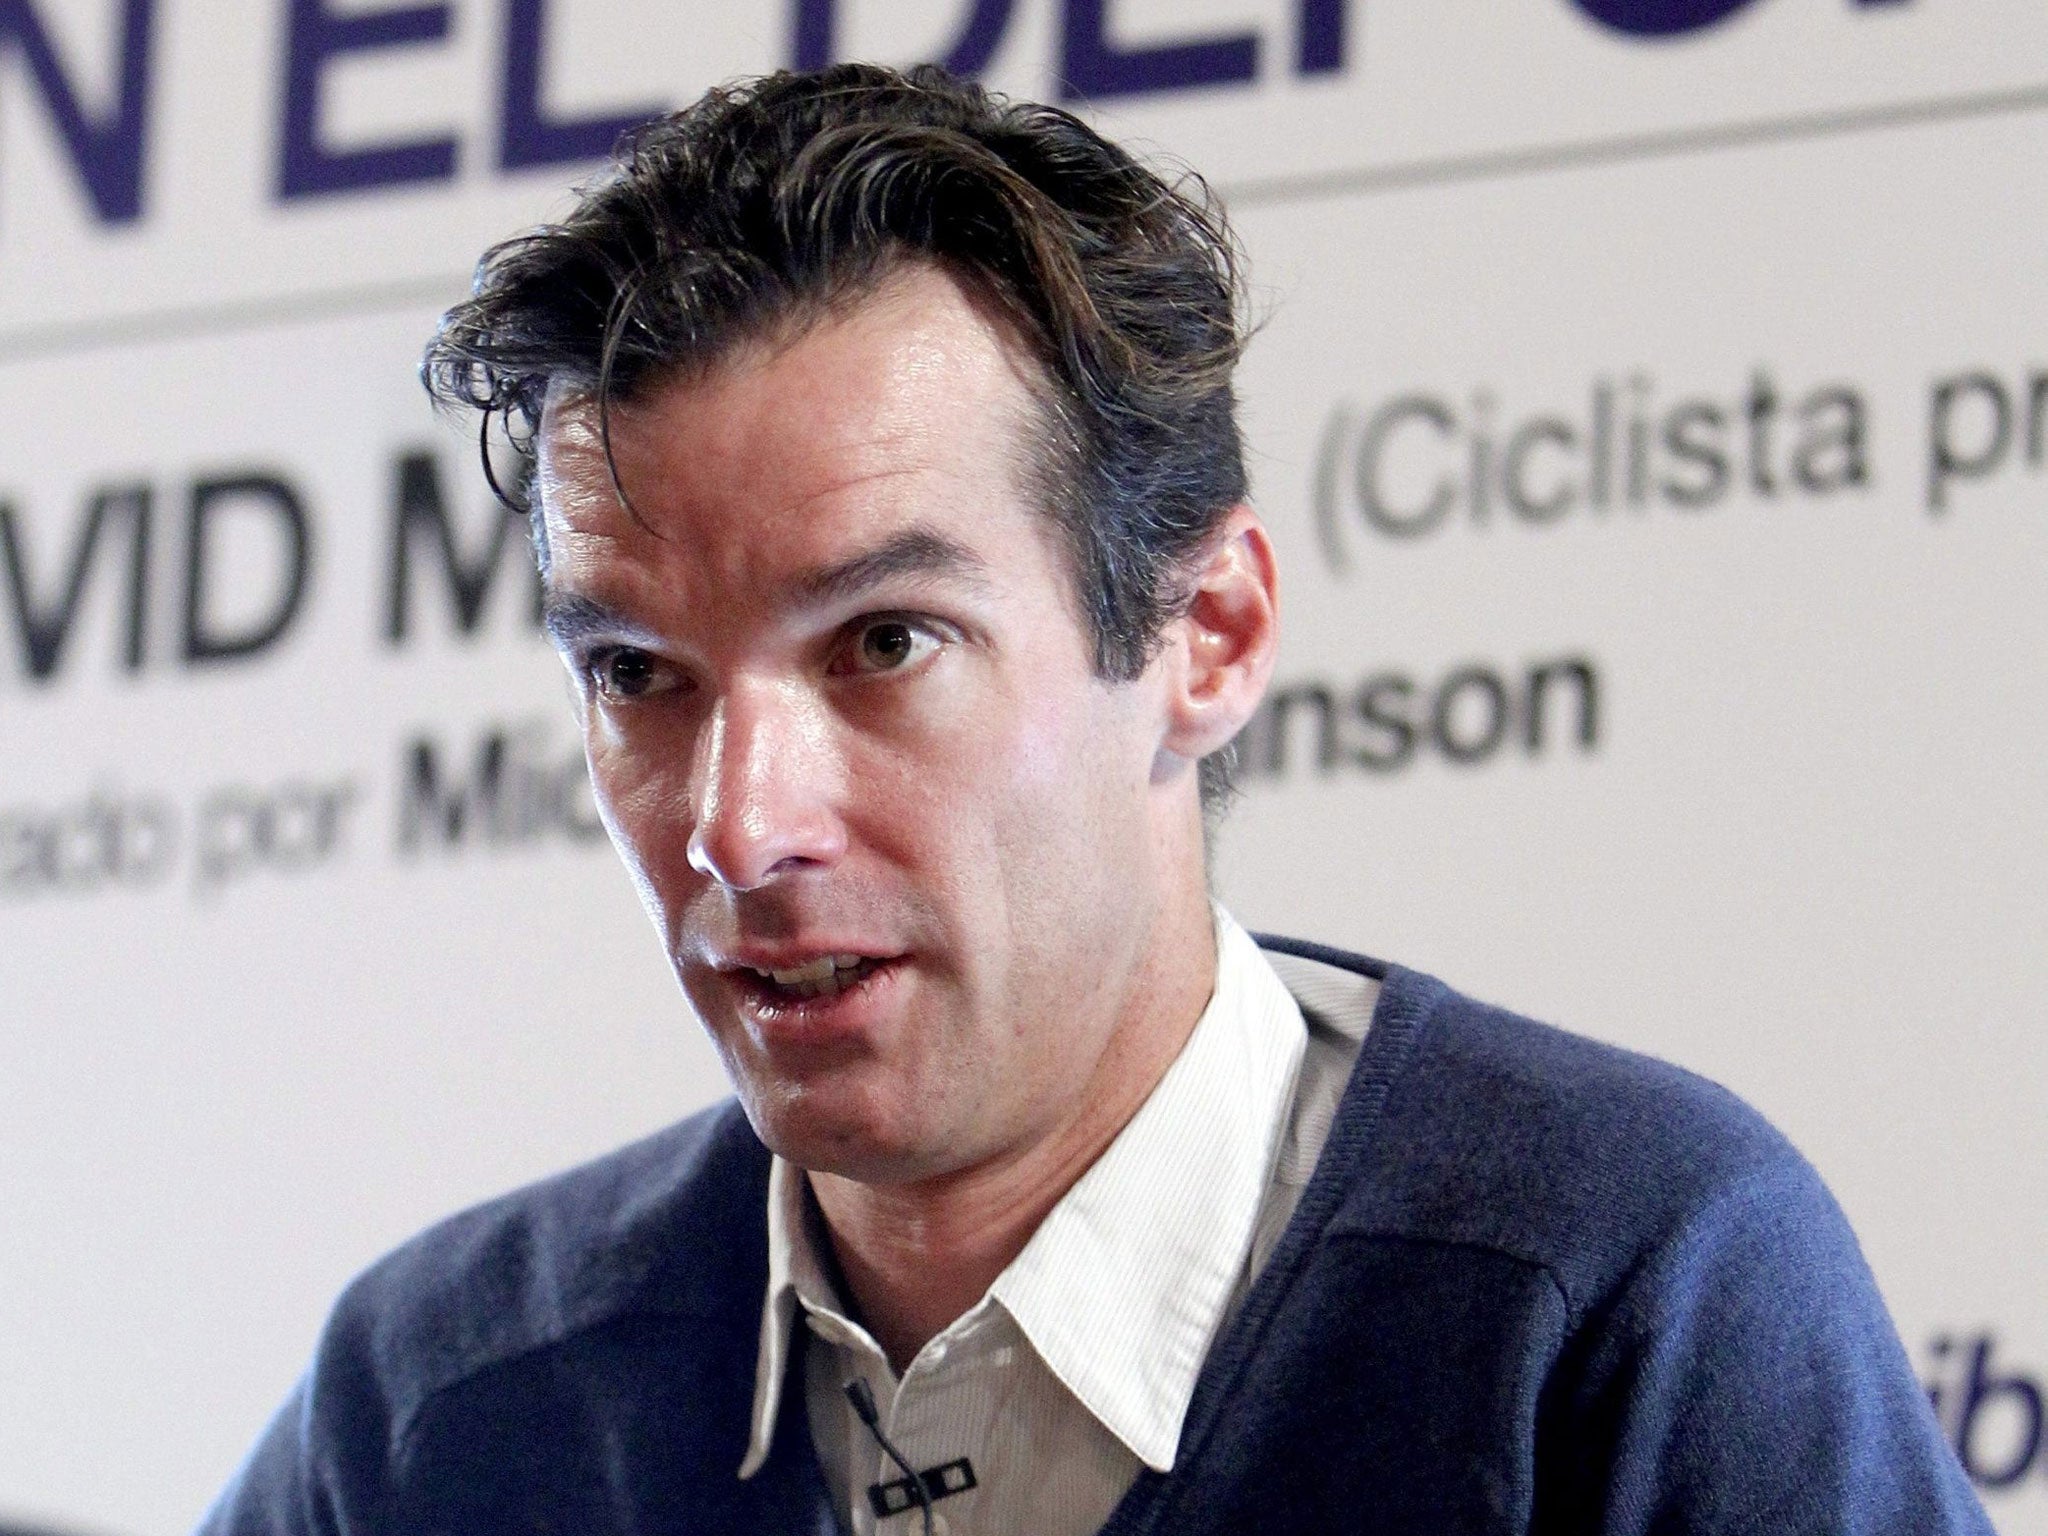 David Millar: "We have cleaned up our sport. Professional cycling is probably now one of the cleanest sports in the world."